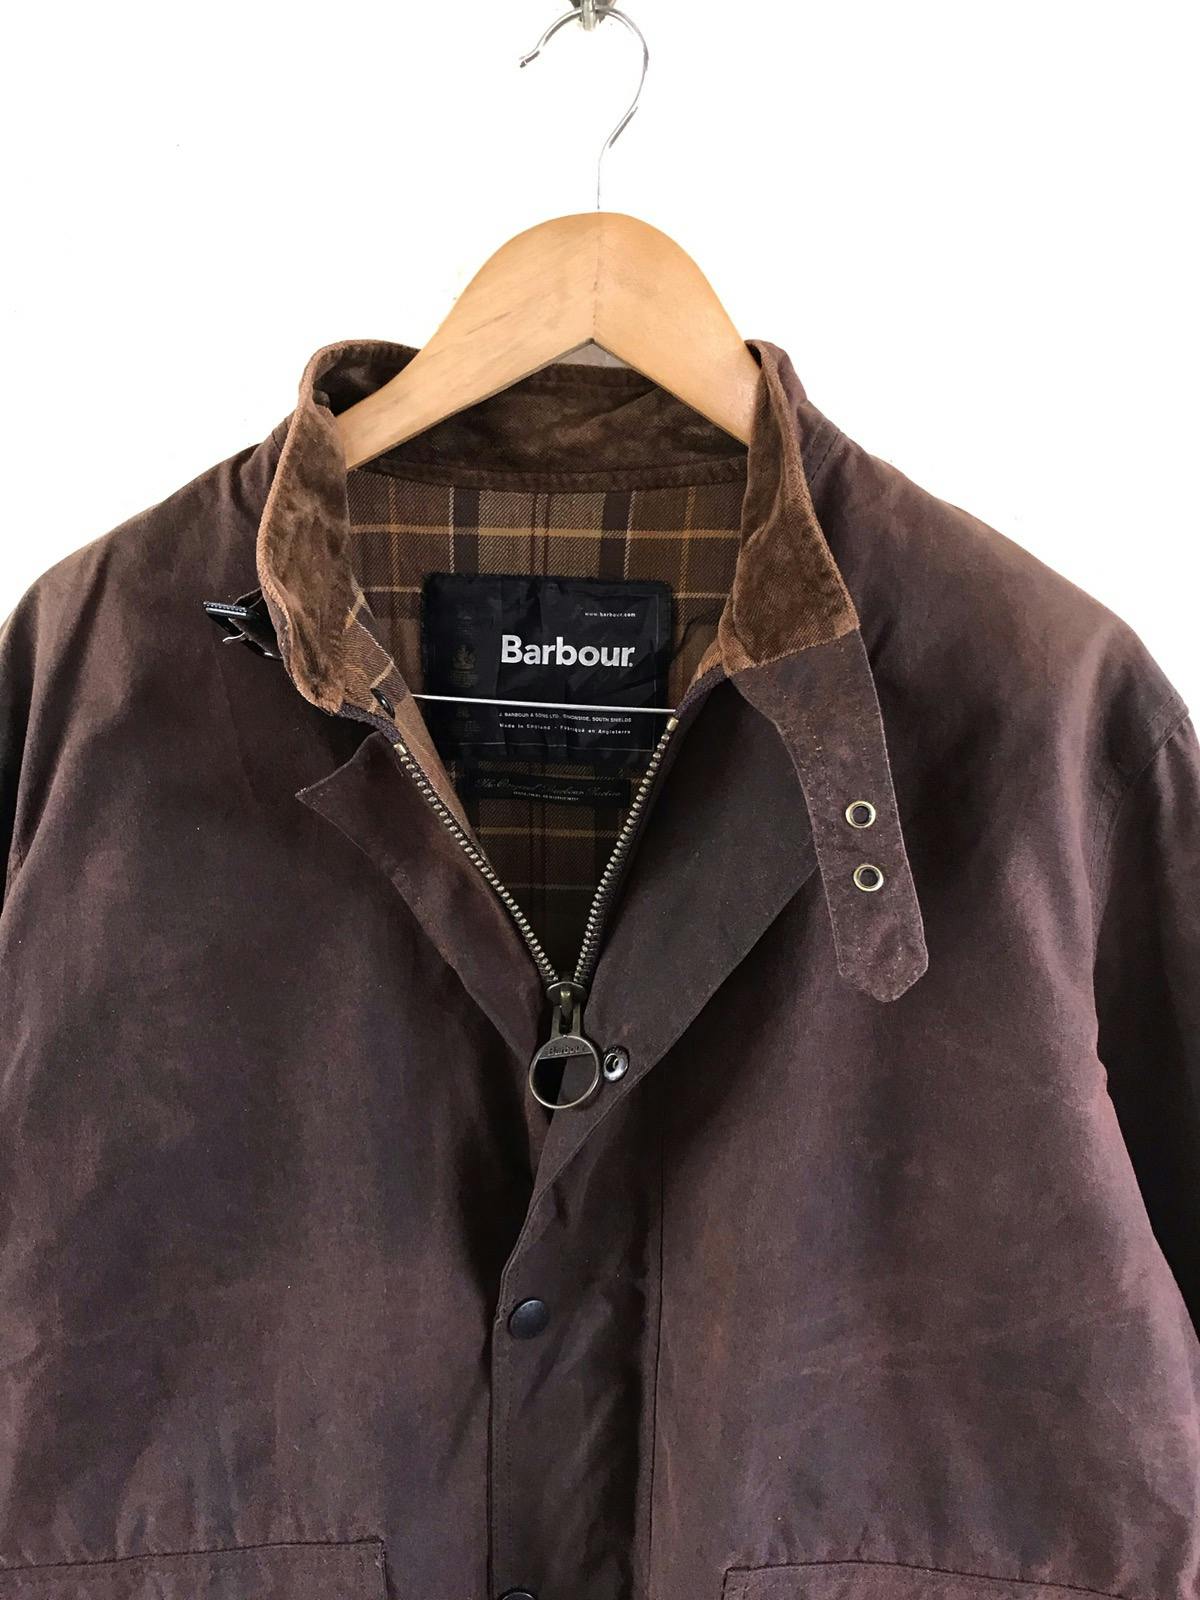 Barbour Wax Jacket Made in England - 4